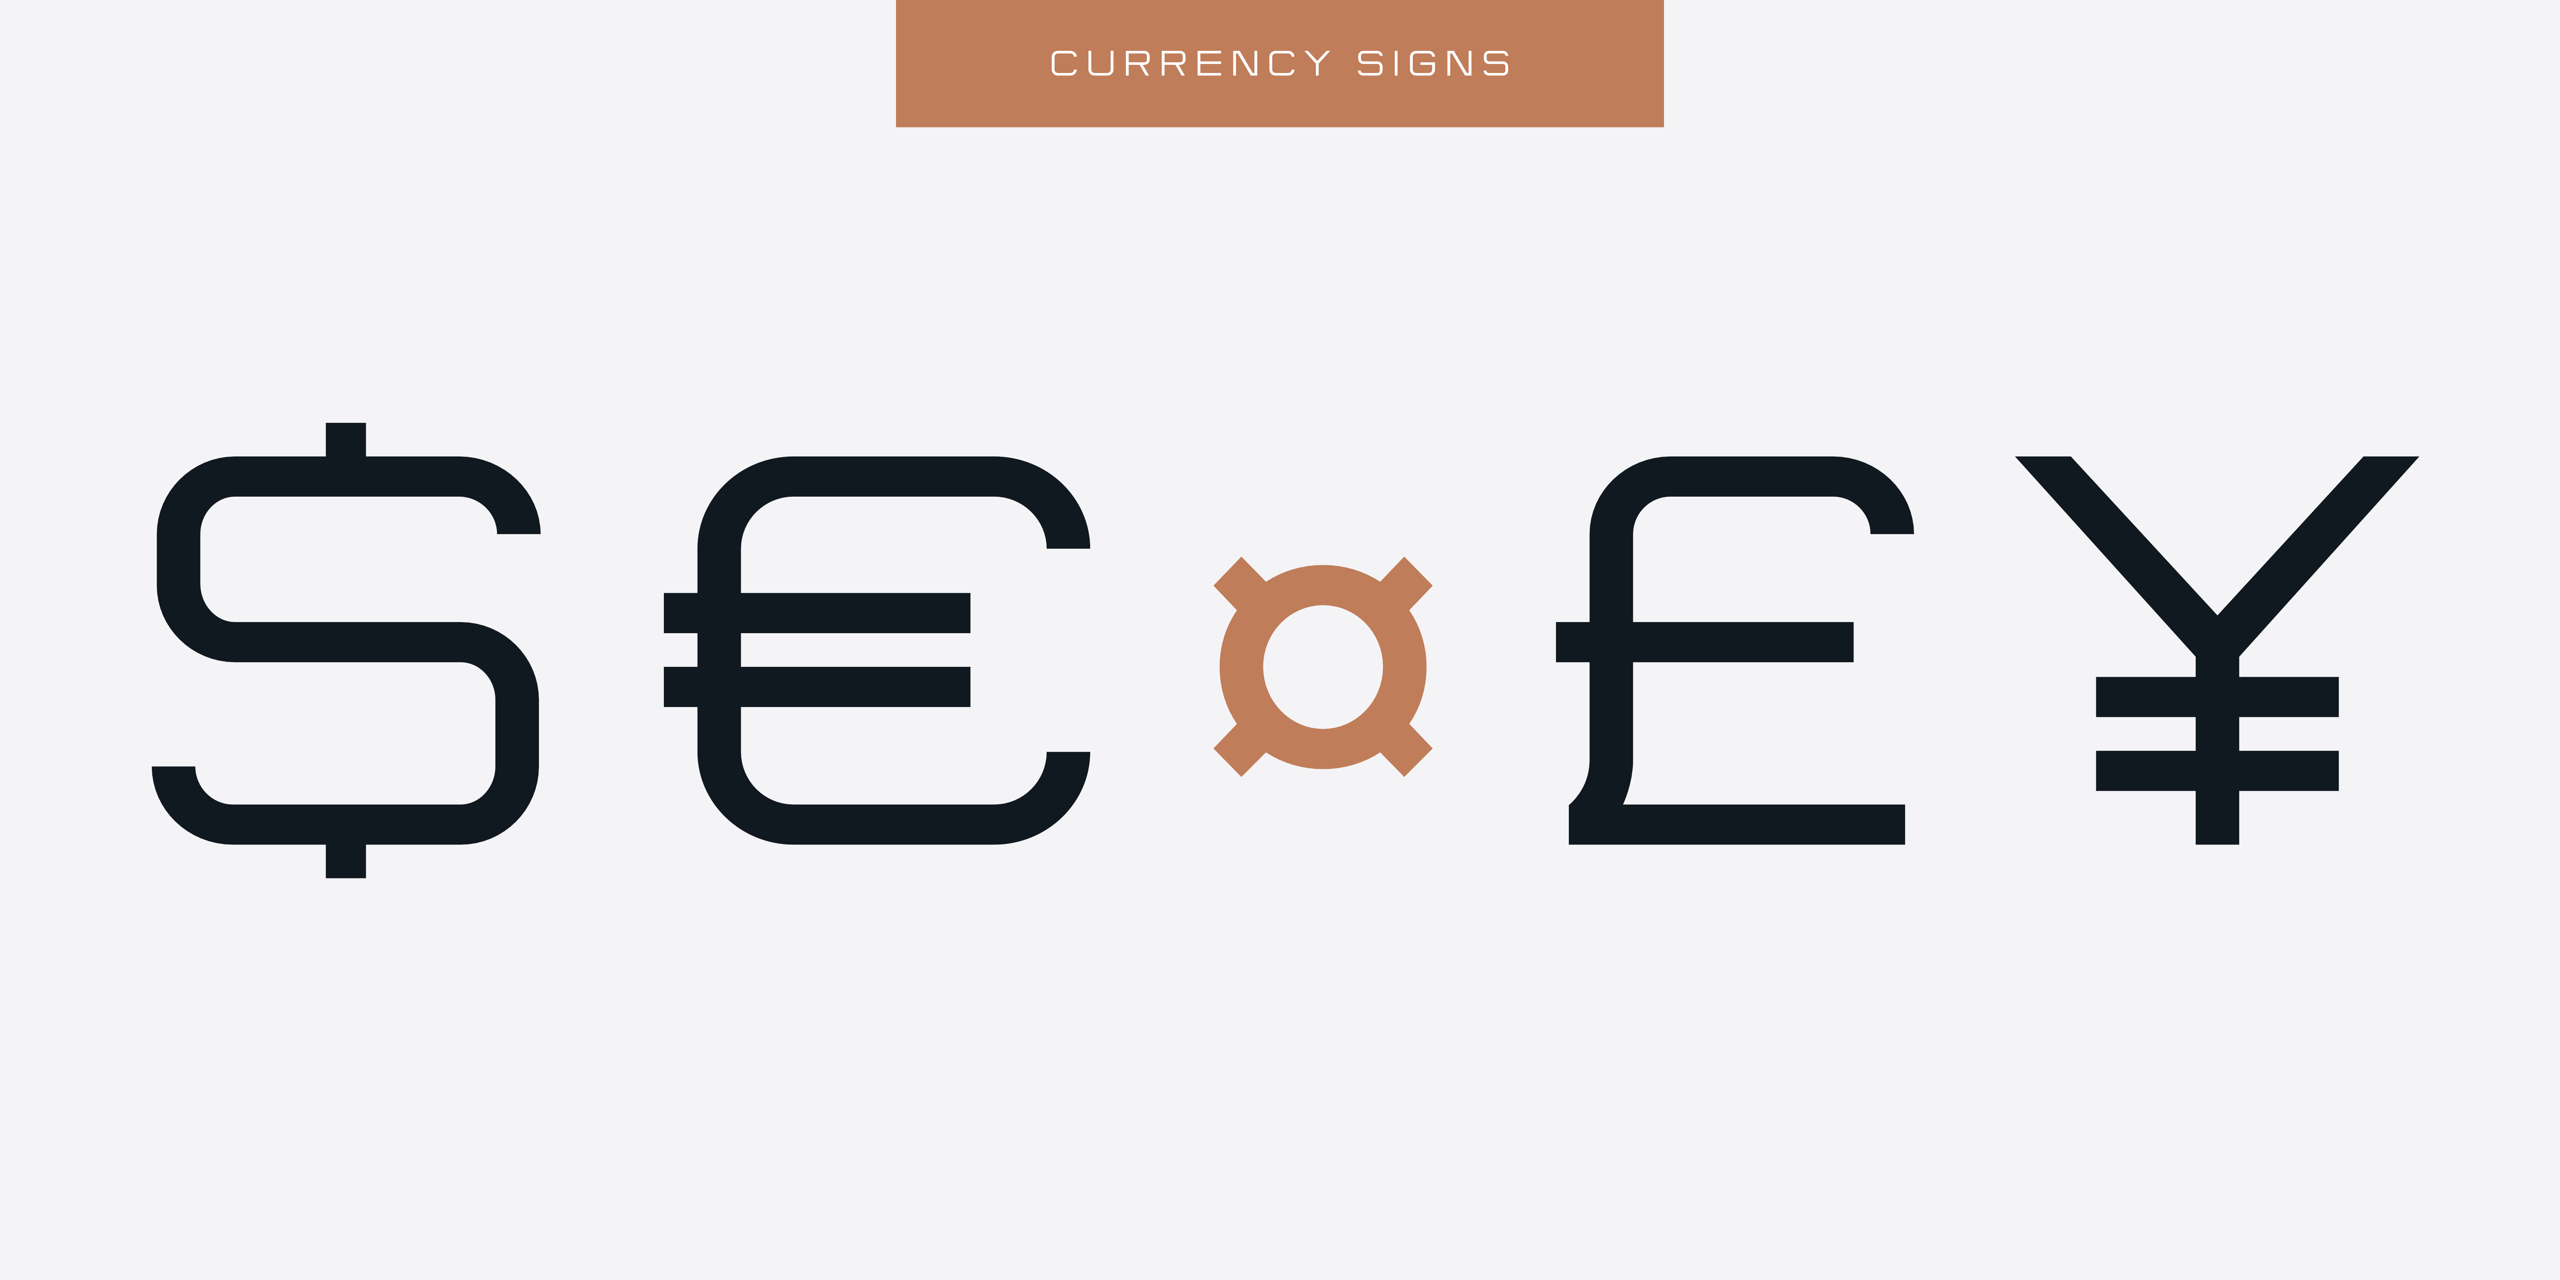 Flat Sans Extended - currency signs